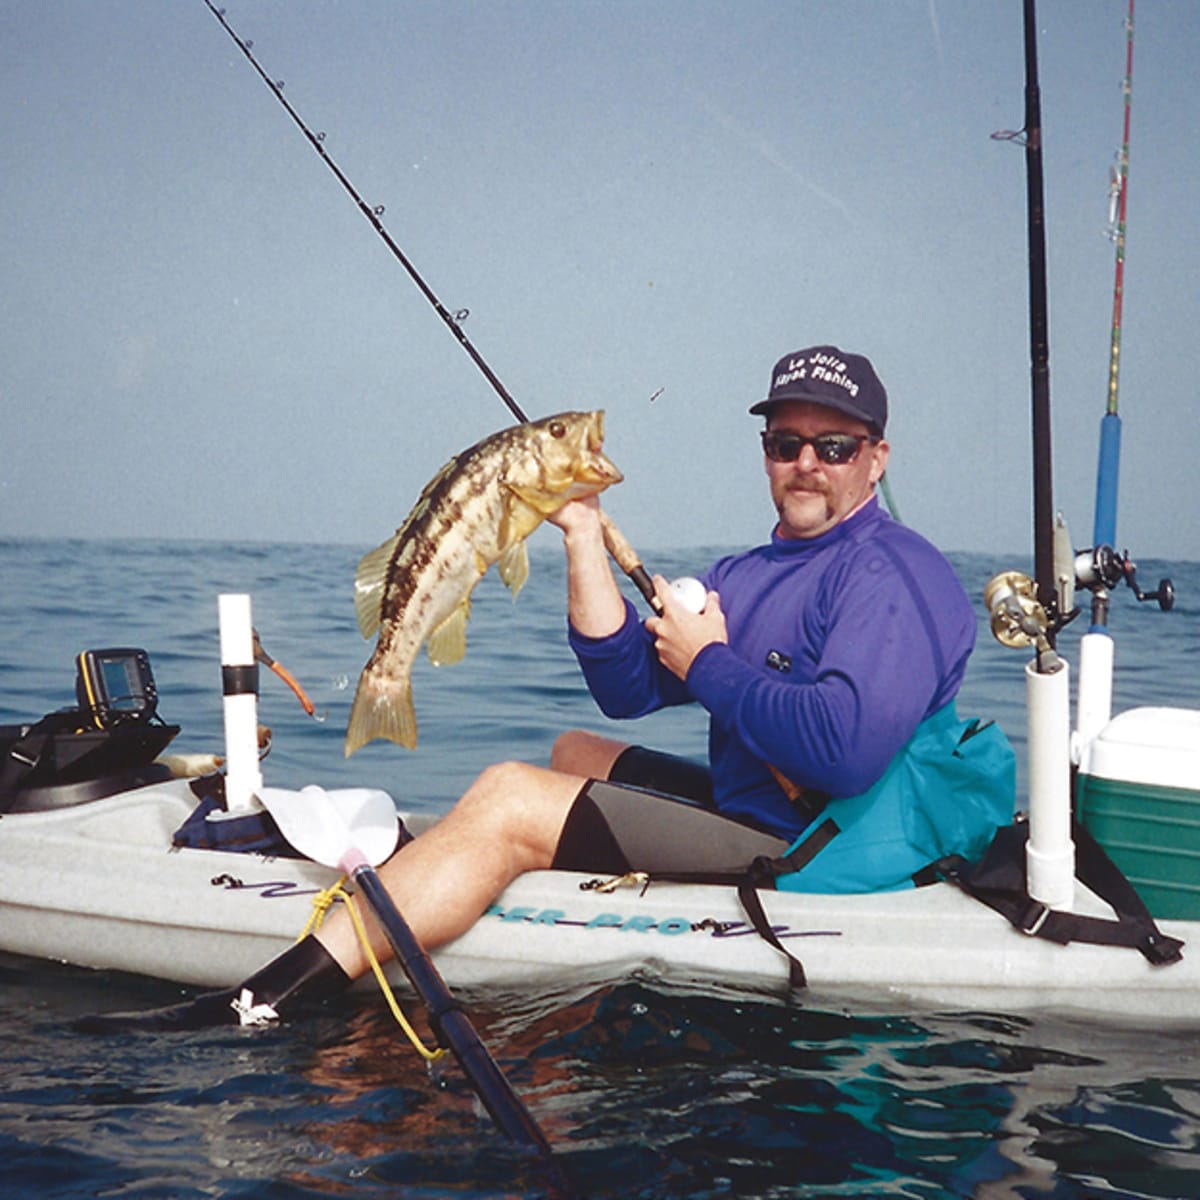 Kayak Evolution: In The Beginning, Almost - Part 1 of Paul Lebowitz's  in-depth feature on the modern fishing kayak - Men's Journal